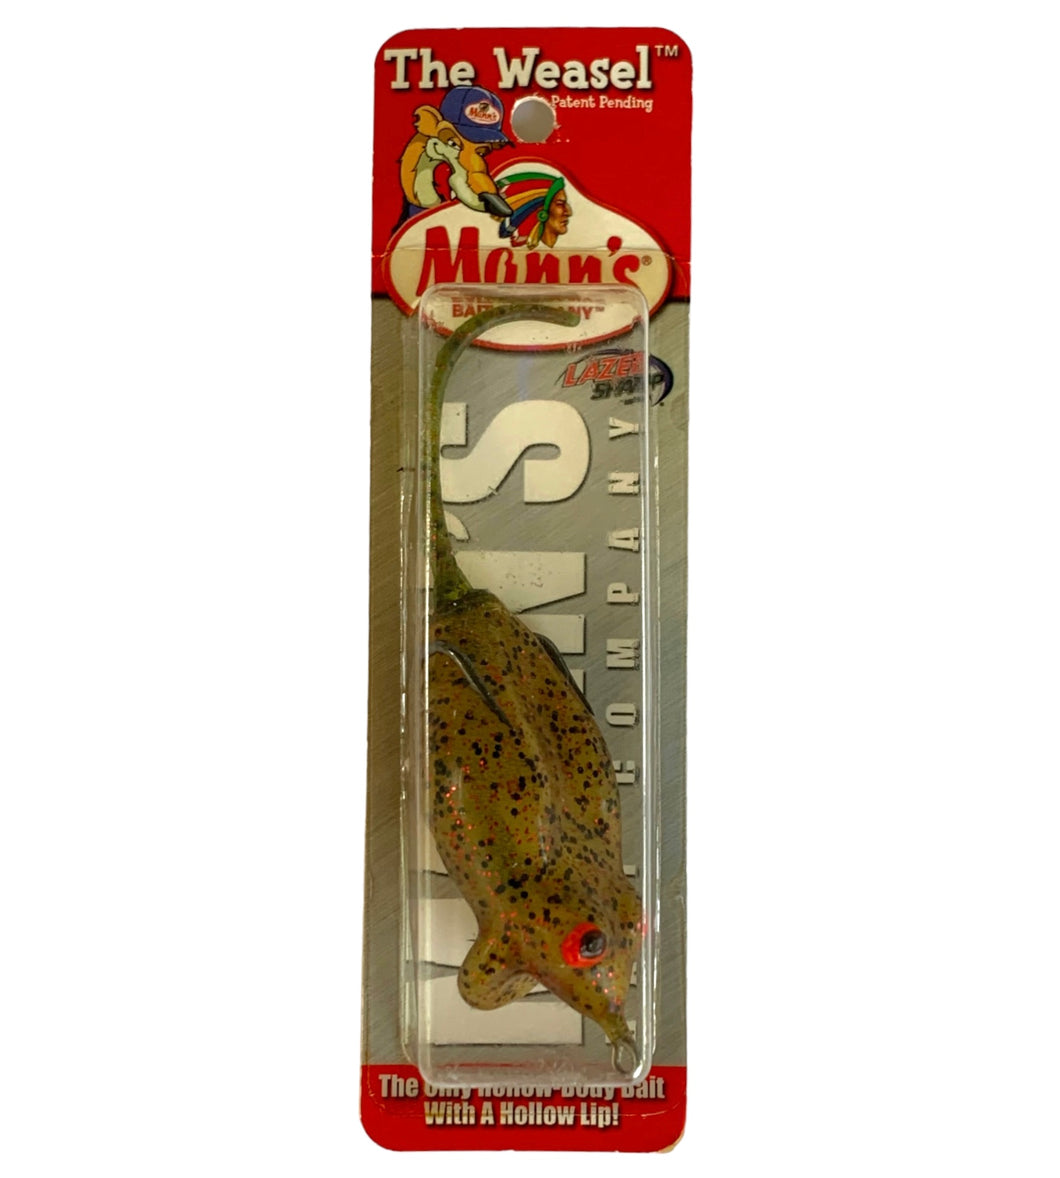 Mann's Bait Company THE WEASEL Fishing Lure • WSL200-1 WATERMELON RED